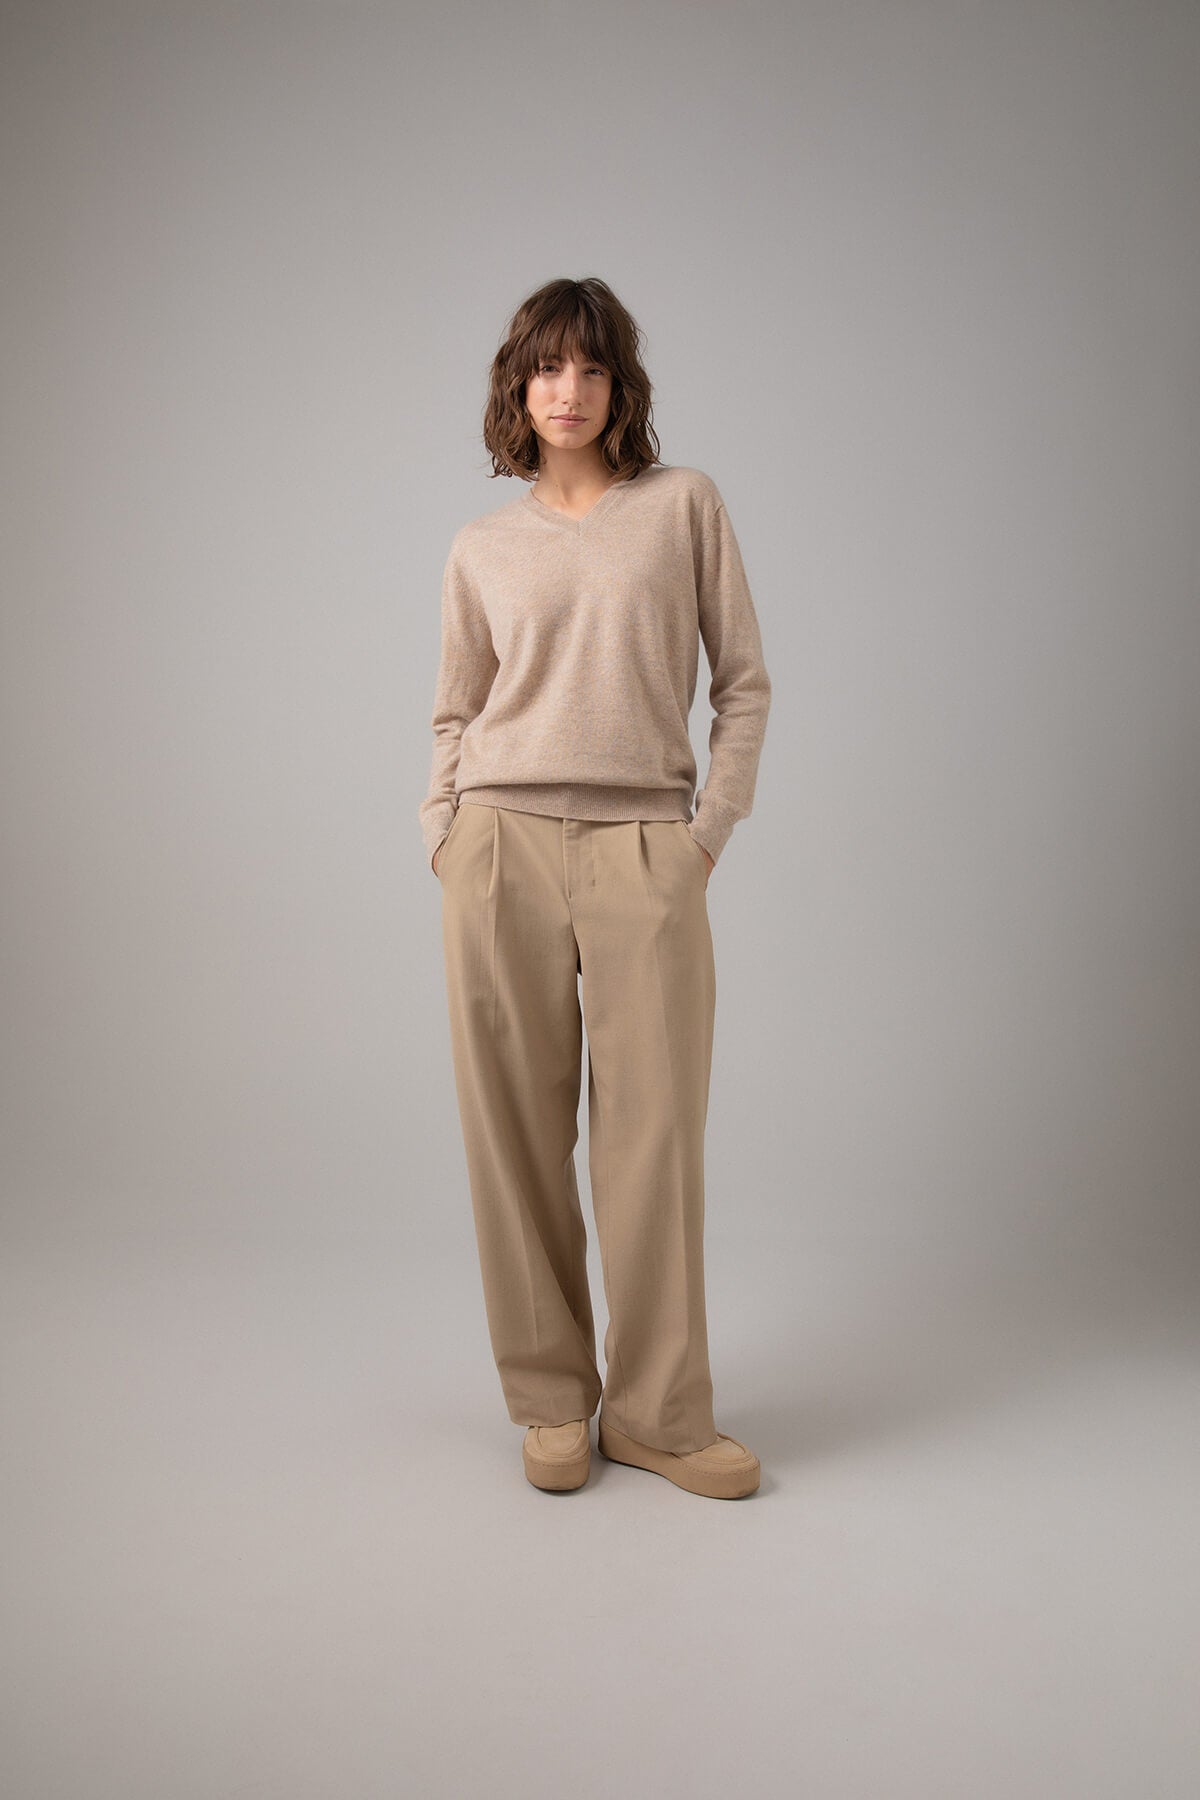 Johnstons of Elgin Women's V Neck Cashmere Jumper in Oatmeal worn with Camel Trousers on a grey background KAI05140HB0210